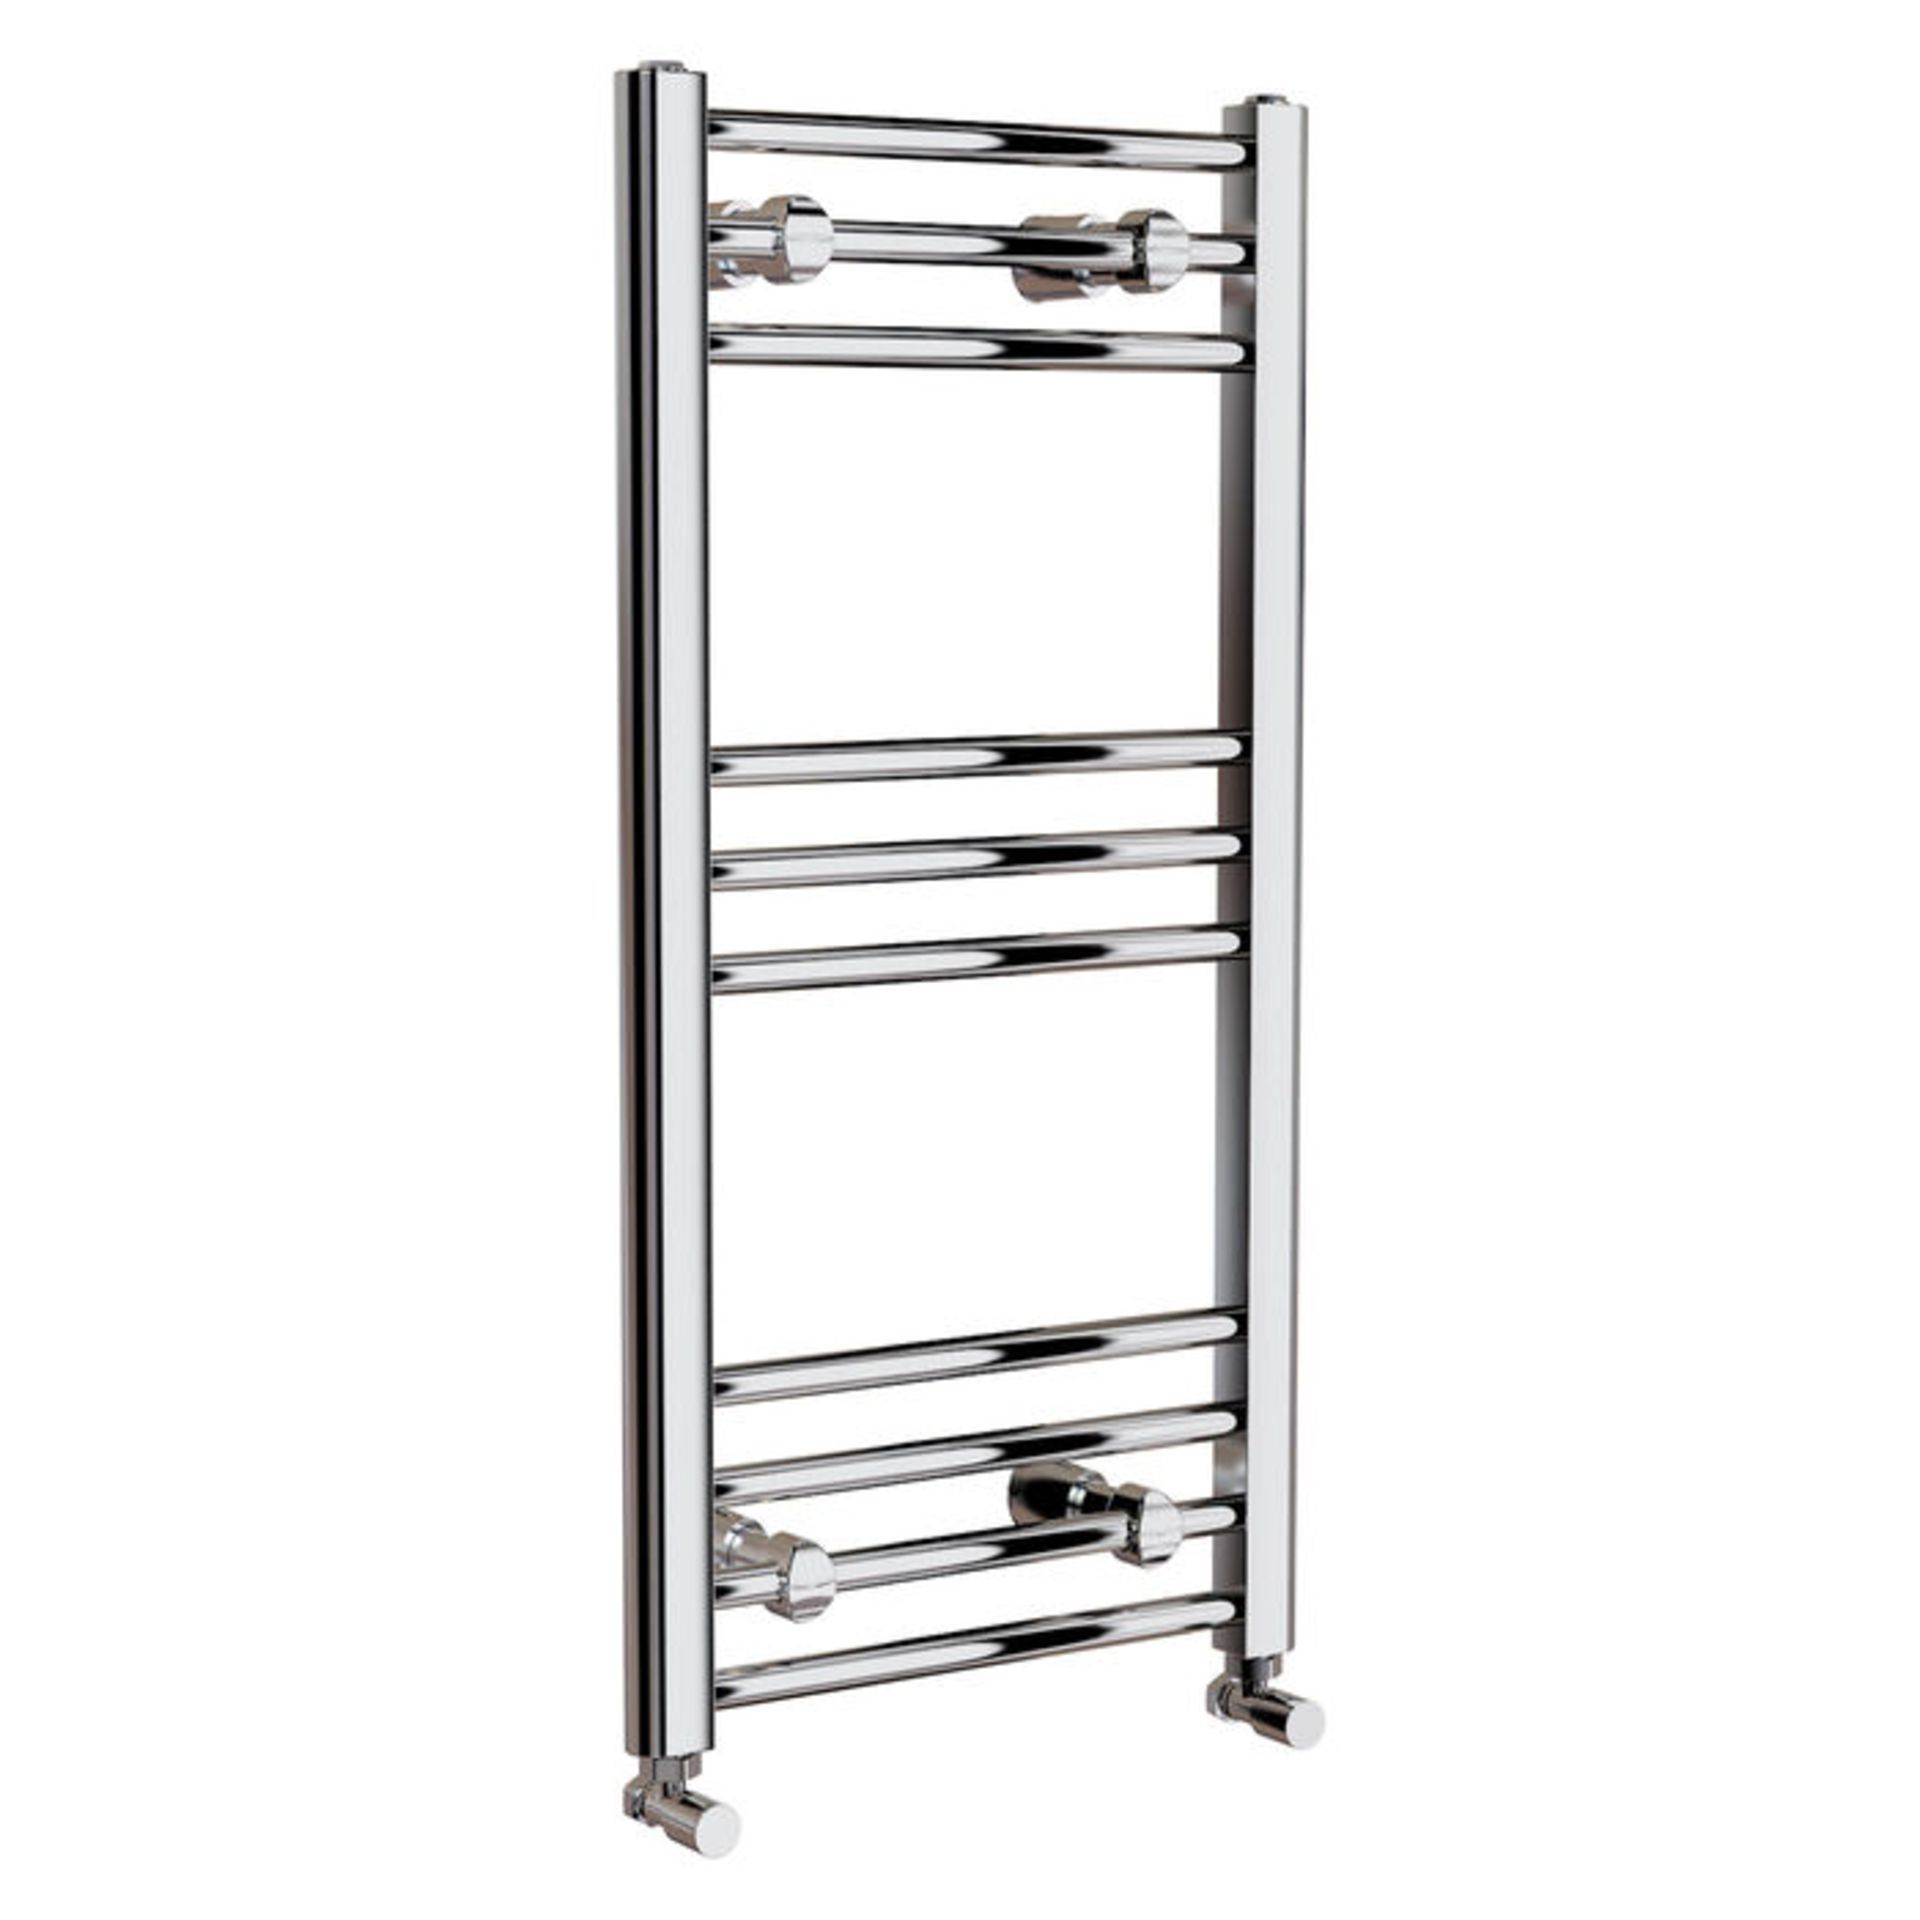 (H49) 800x400mm - 20mm Tubes - Chrome Heated Straight Rail Ladder Towel Radiator We also use t... - Image 3 of 3